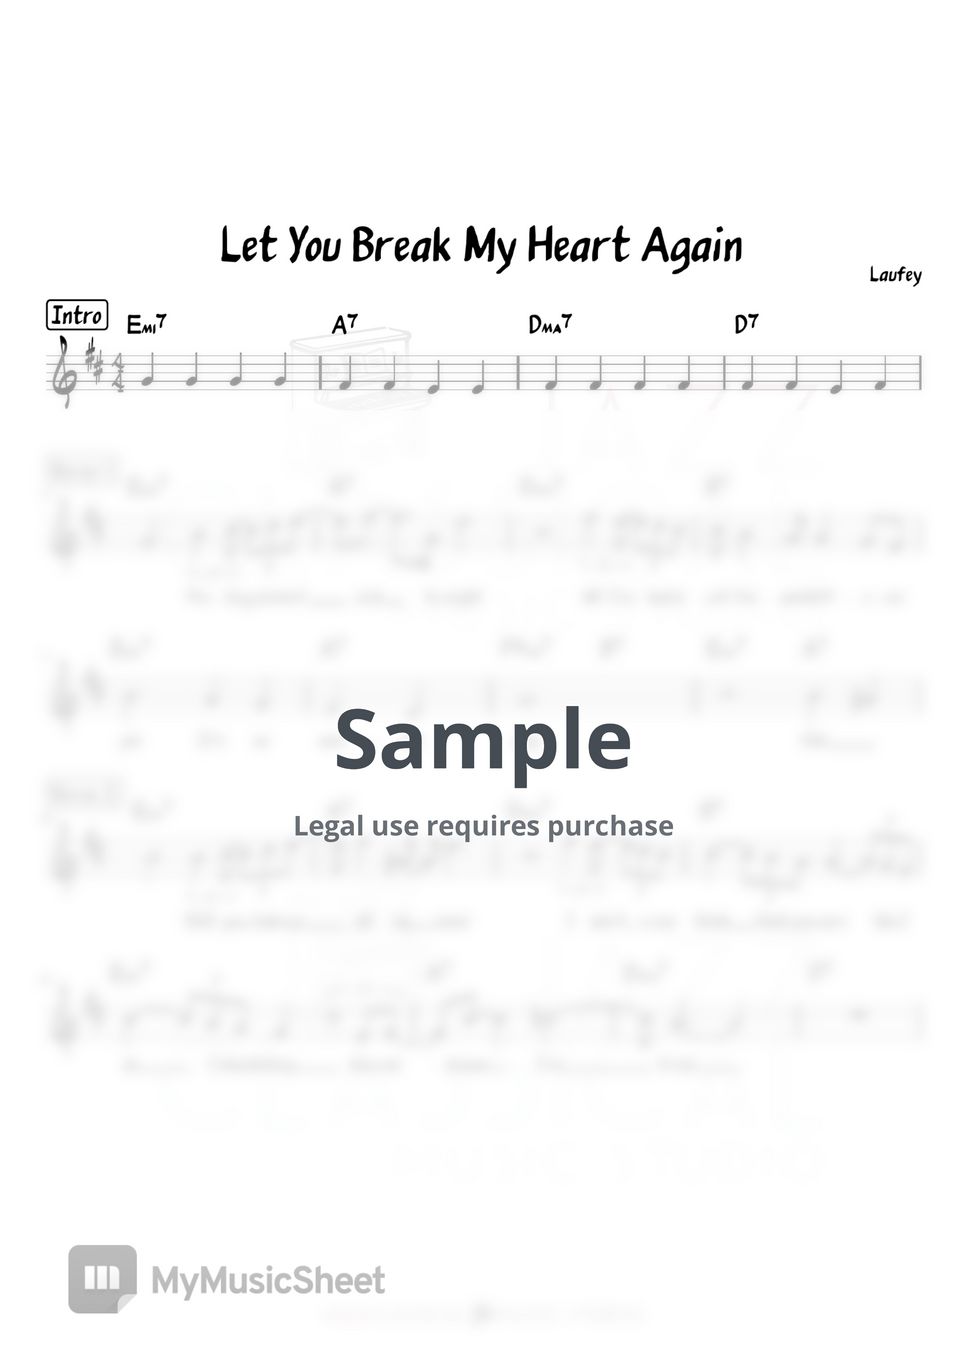 Laufey - Let You Break My Heart Again by Jazz Classical Music Studio